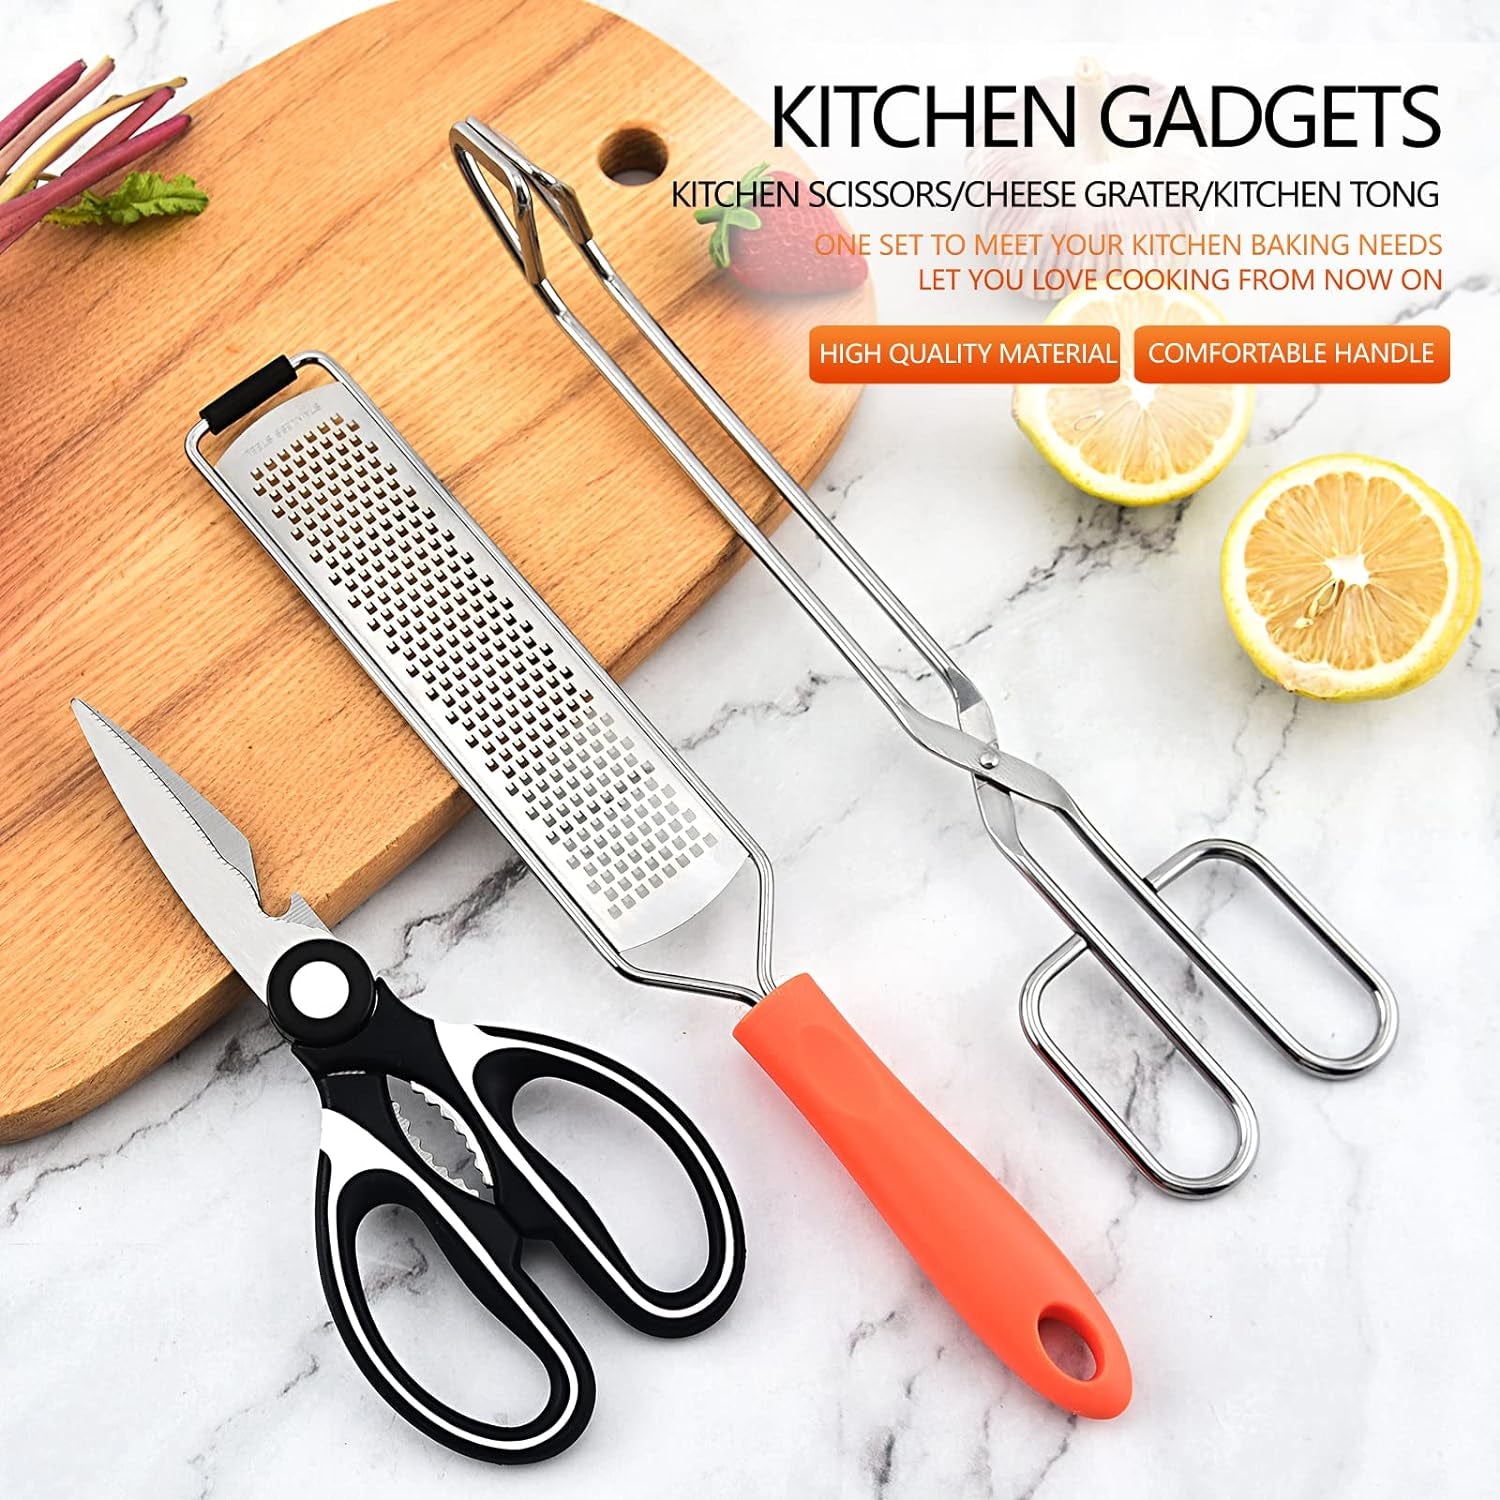 3Pack Kitchen Gadgets Utility Set - Kitchen Shears Poultry Scissor & Tongs for Cutting Meat Chicken Veggies, Cheese Grater Lemon Zester, All Purpose Kitchen Tools Gadgets Scissor Clip Zester Set  WGPG   